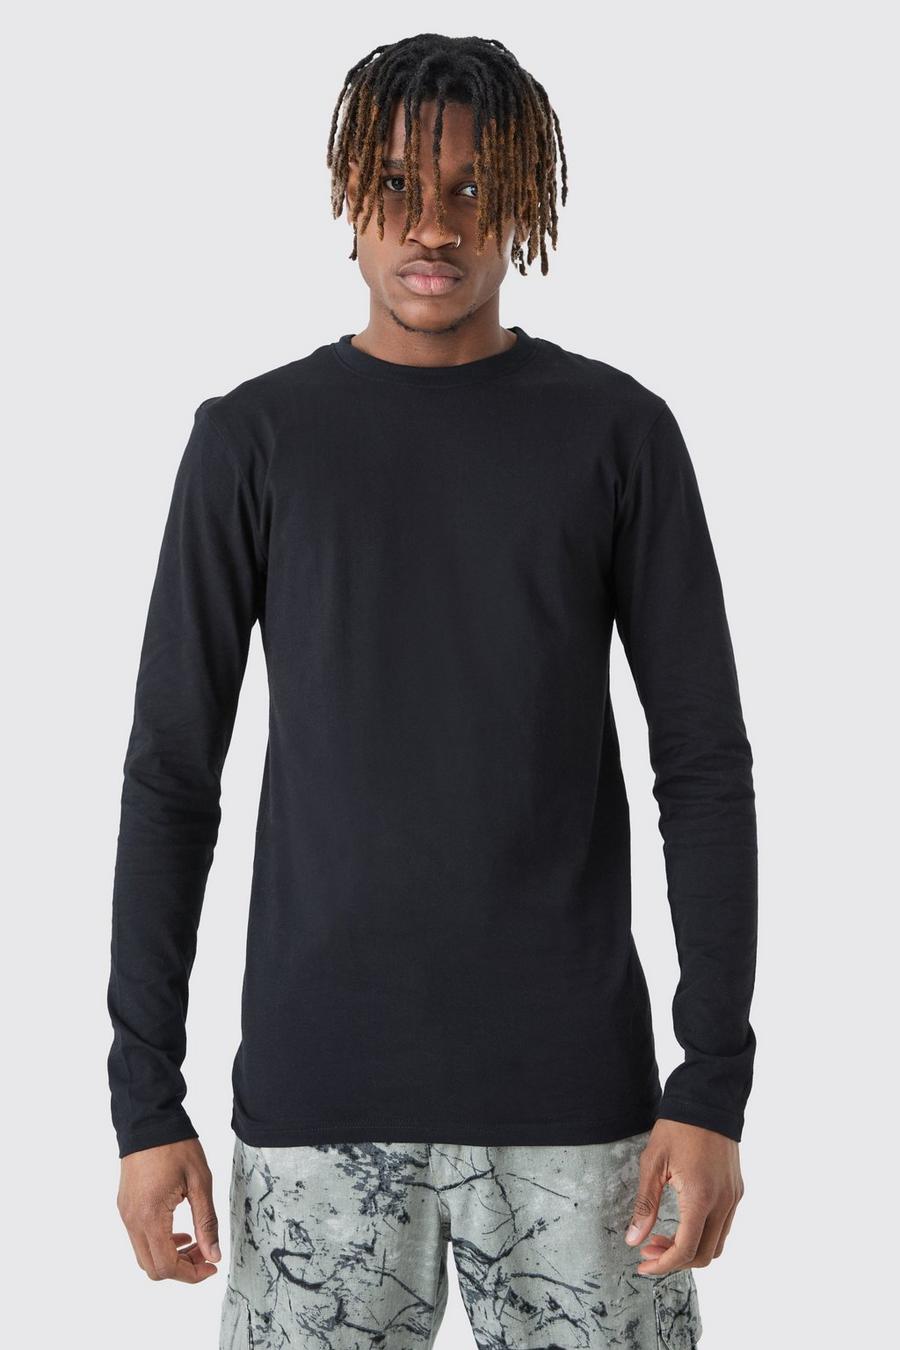 Black baby Long Sleeve Muscle Fit T-shirt